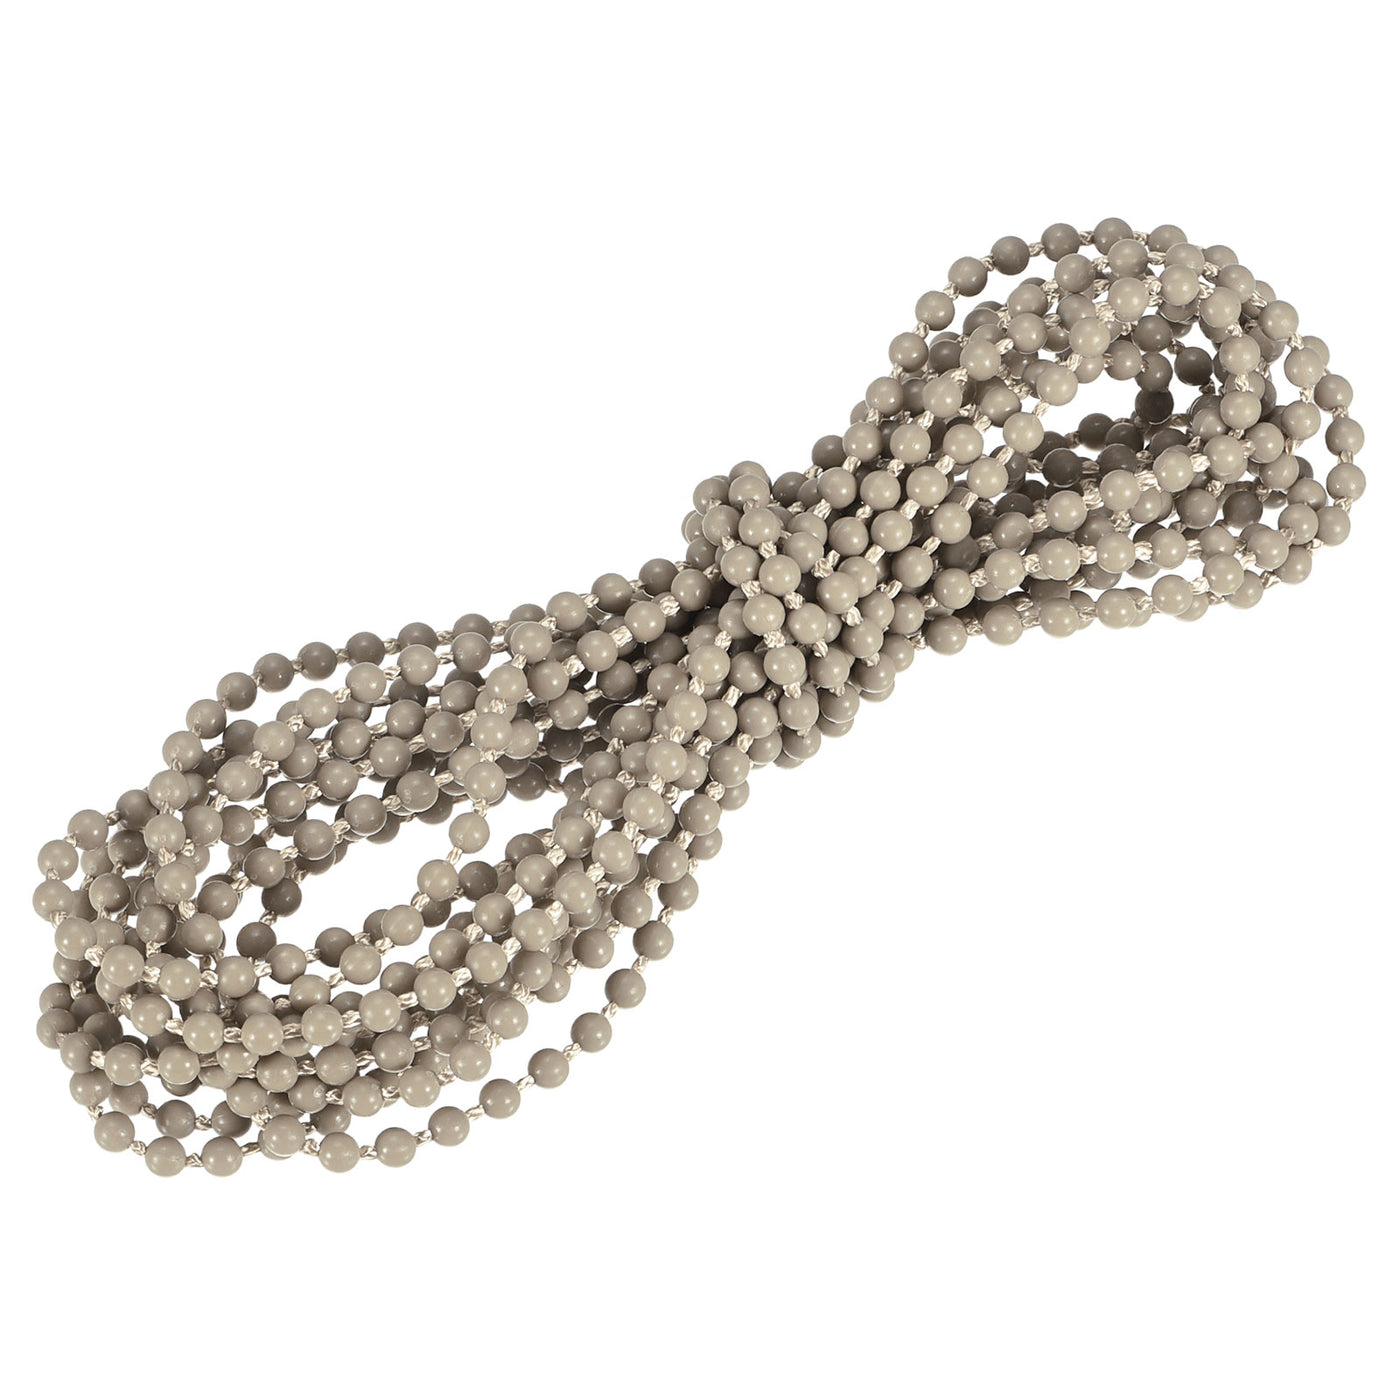 uxcell Uxcell 4.37 Yards Blinds Beaded Chain Roller Shade Cord for Window Repair Parts, Khaki